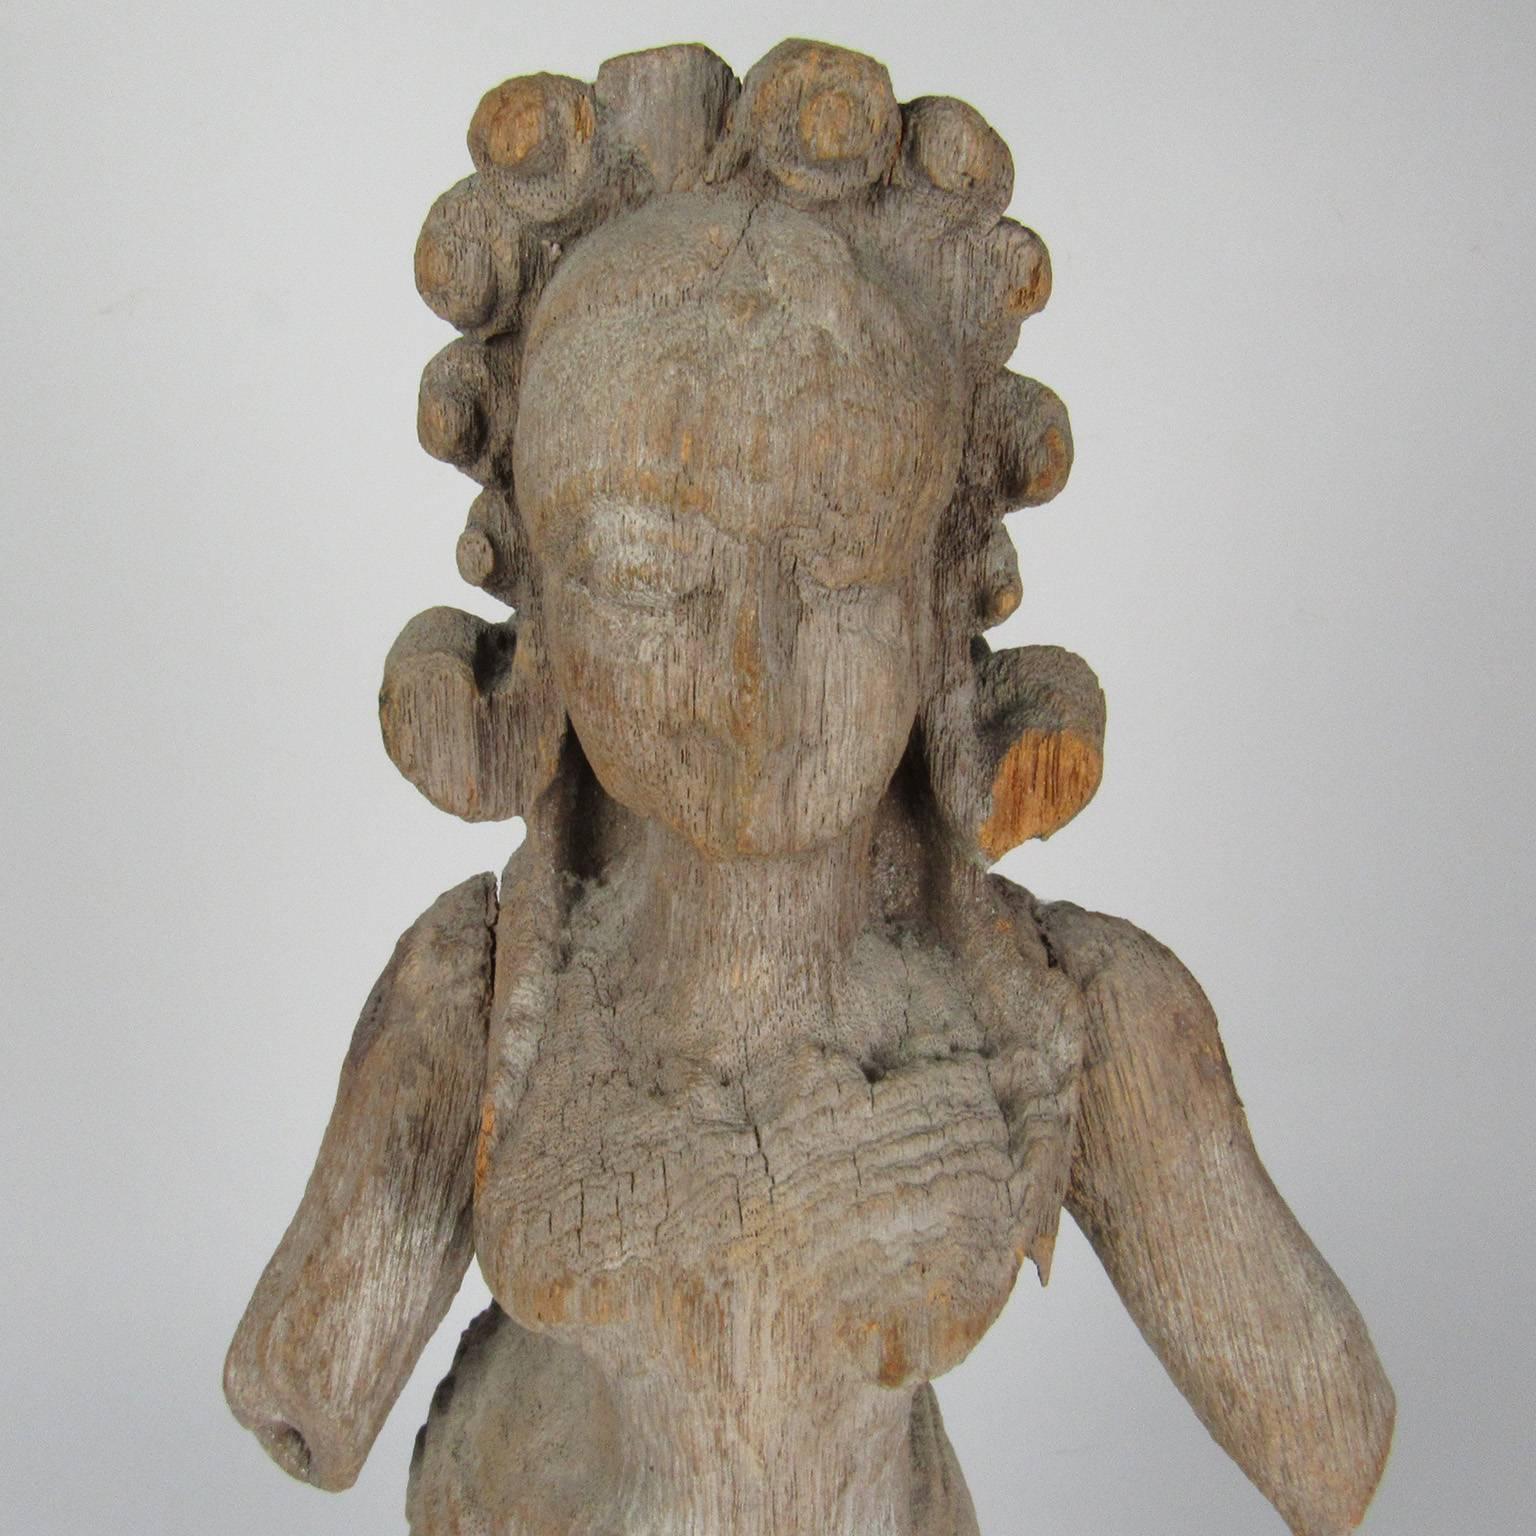 Carved wood figure of a female Hindu deity, regional style, probably Nepal, 17th-18th century. Measures: Height 17 1/2 inches.